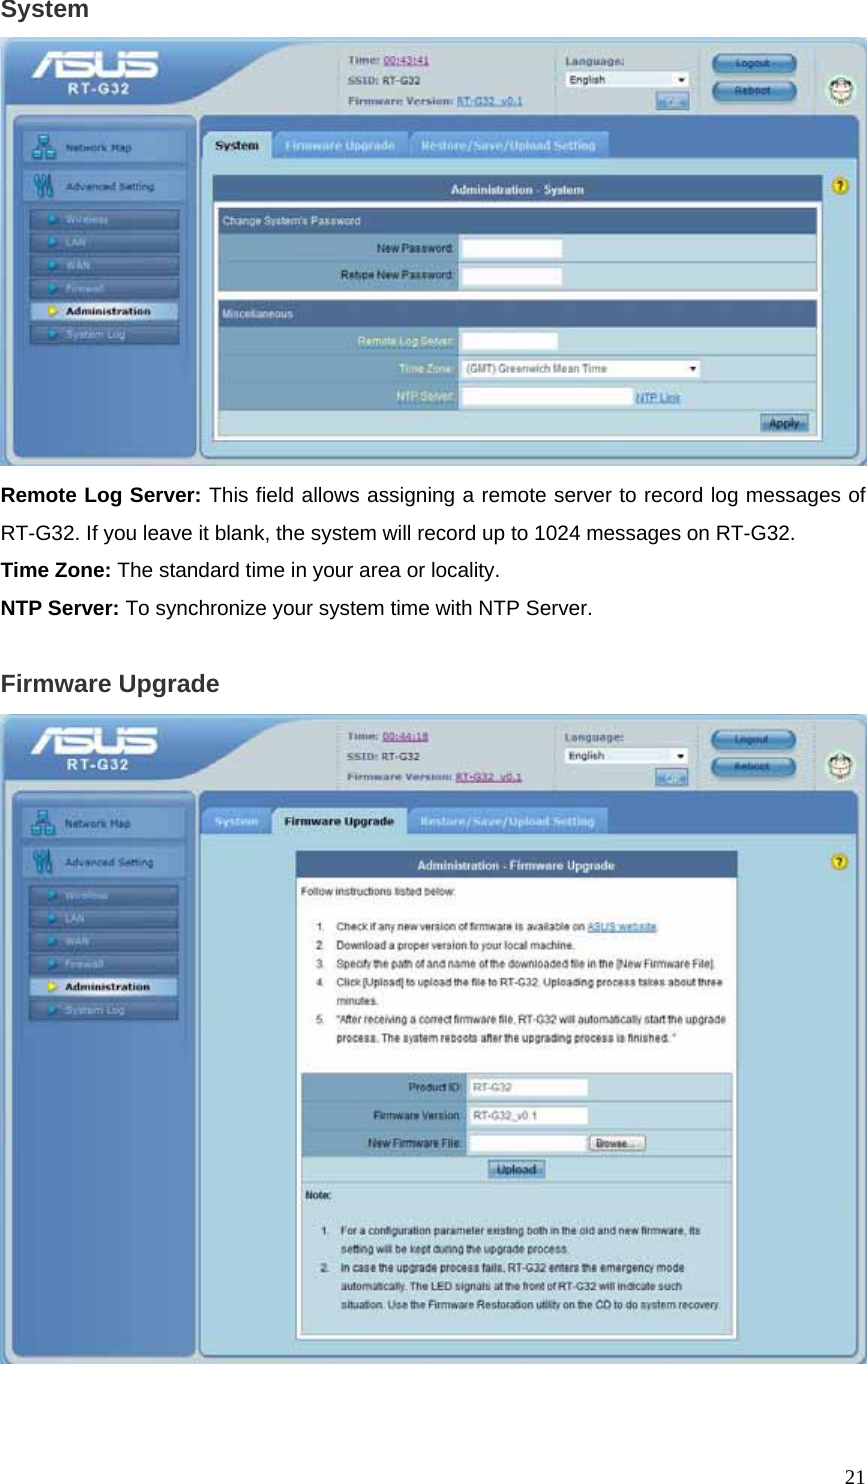  21System  Remote Log Server: This field allows assigning a remote server to record log messages of RT-G32. If you leave it blank, the system will record up to 1024 messages on RT-G32. Time Zone: The standard time in your area or locality. NTP Server: To synchronize your system time with NTP Server.  Firmware Upgrade   